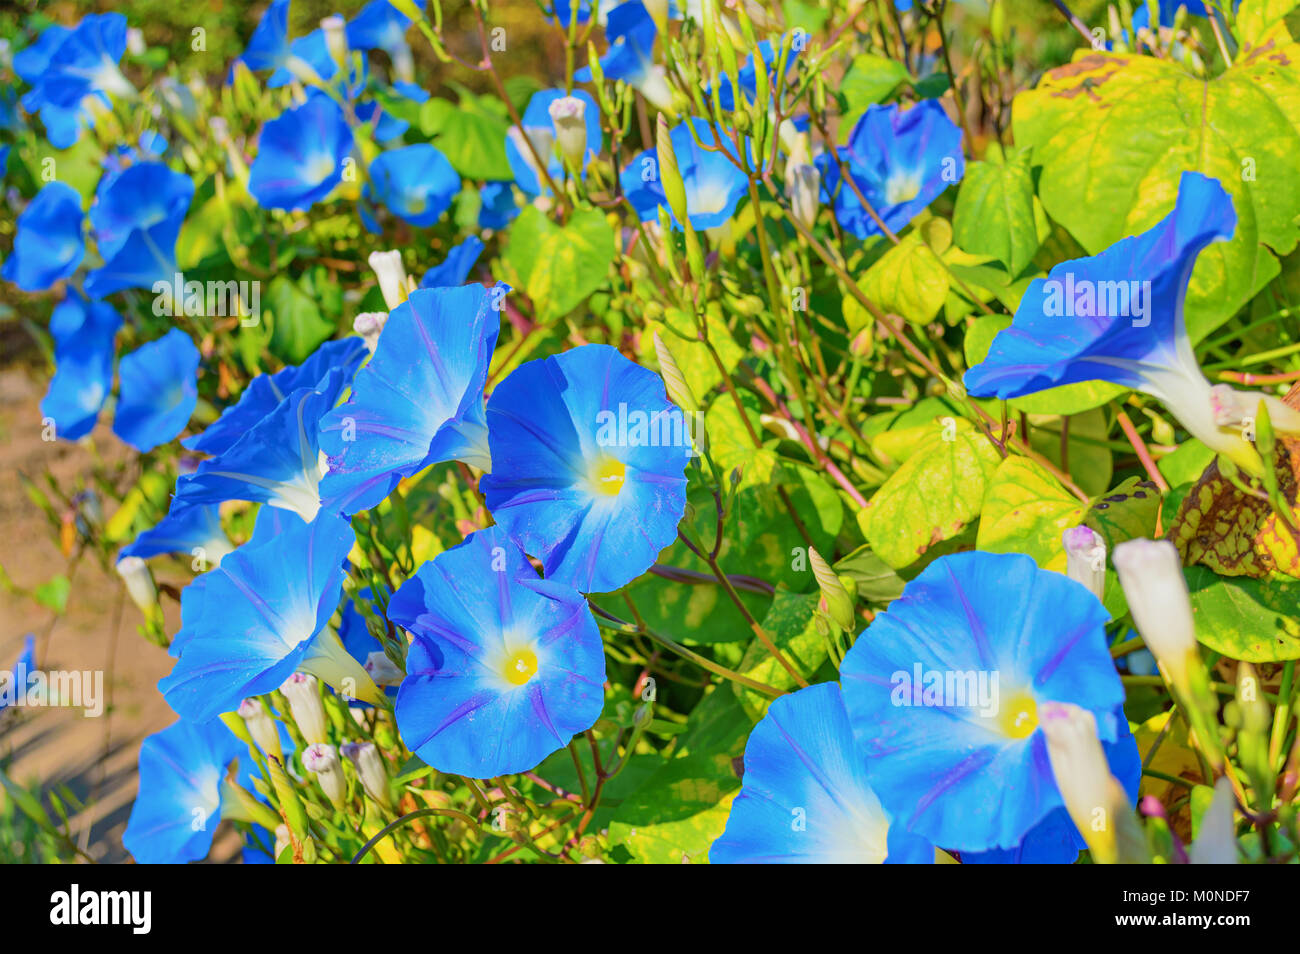 Heavenly blue ipomoea (morning glory) flowers Stock Photo